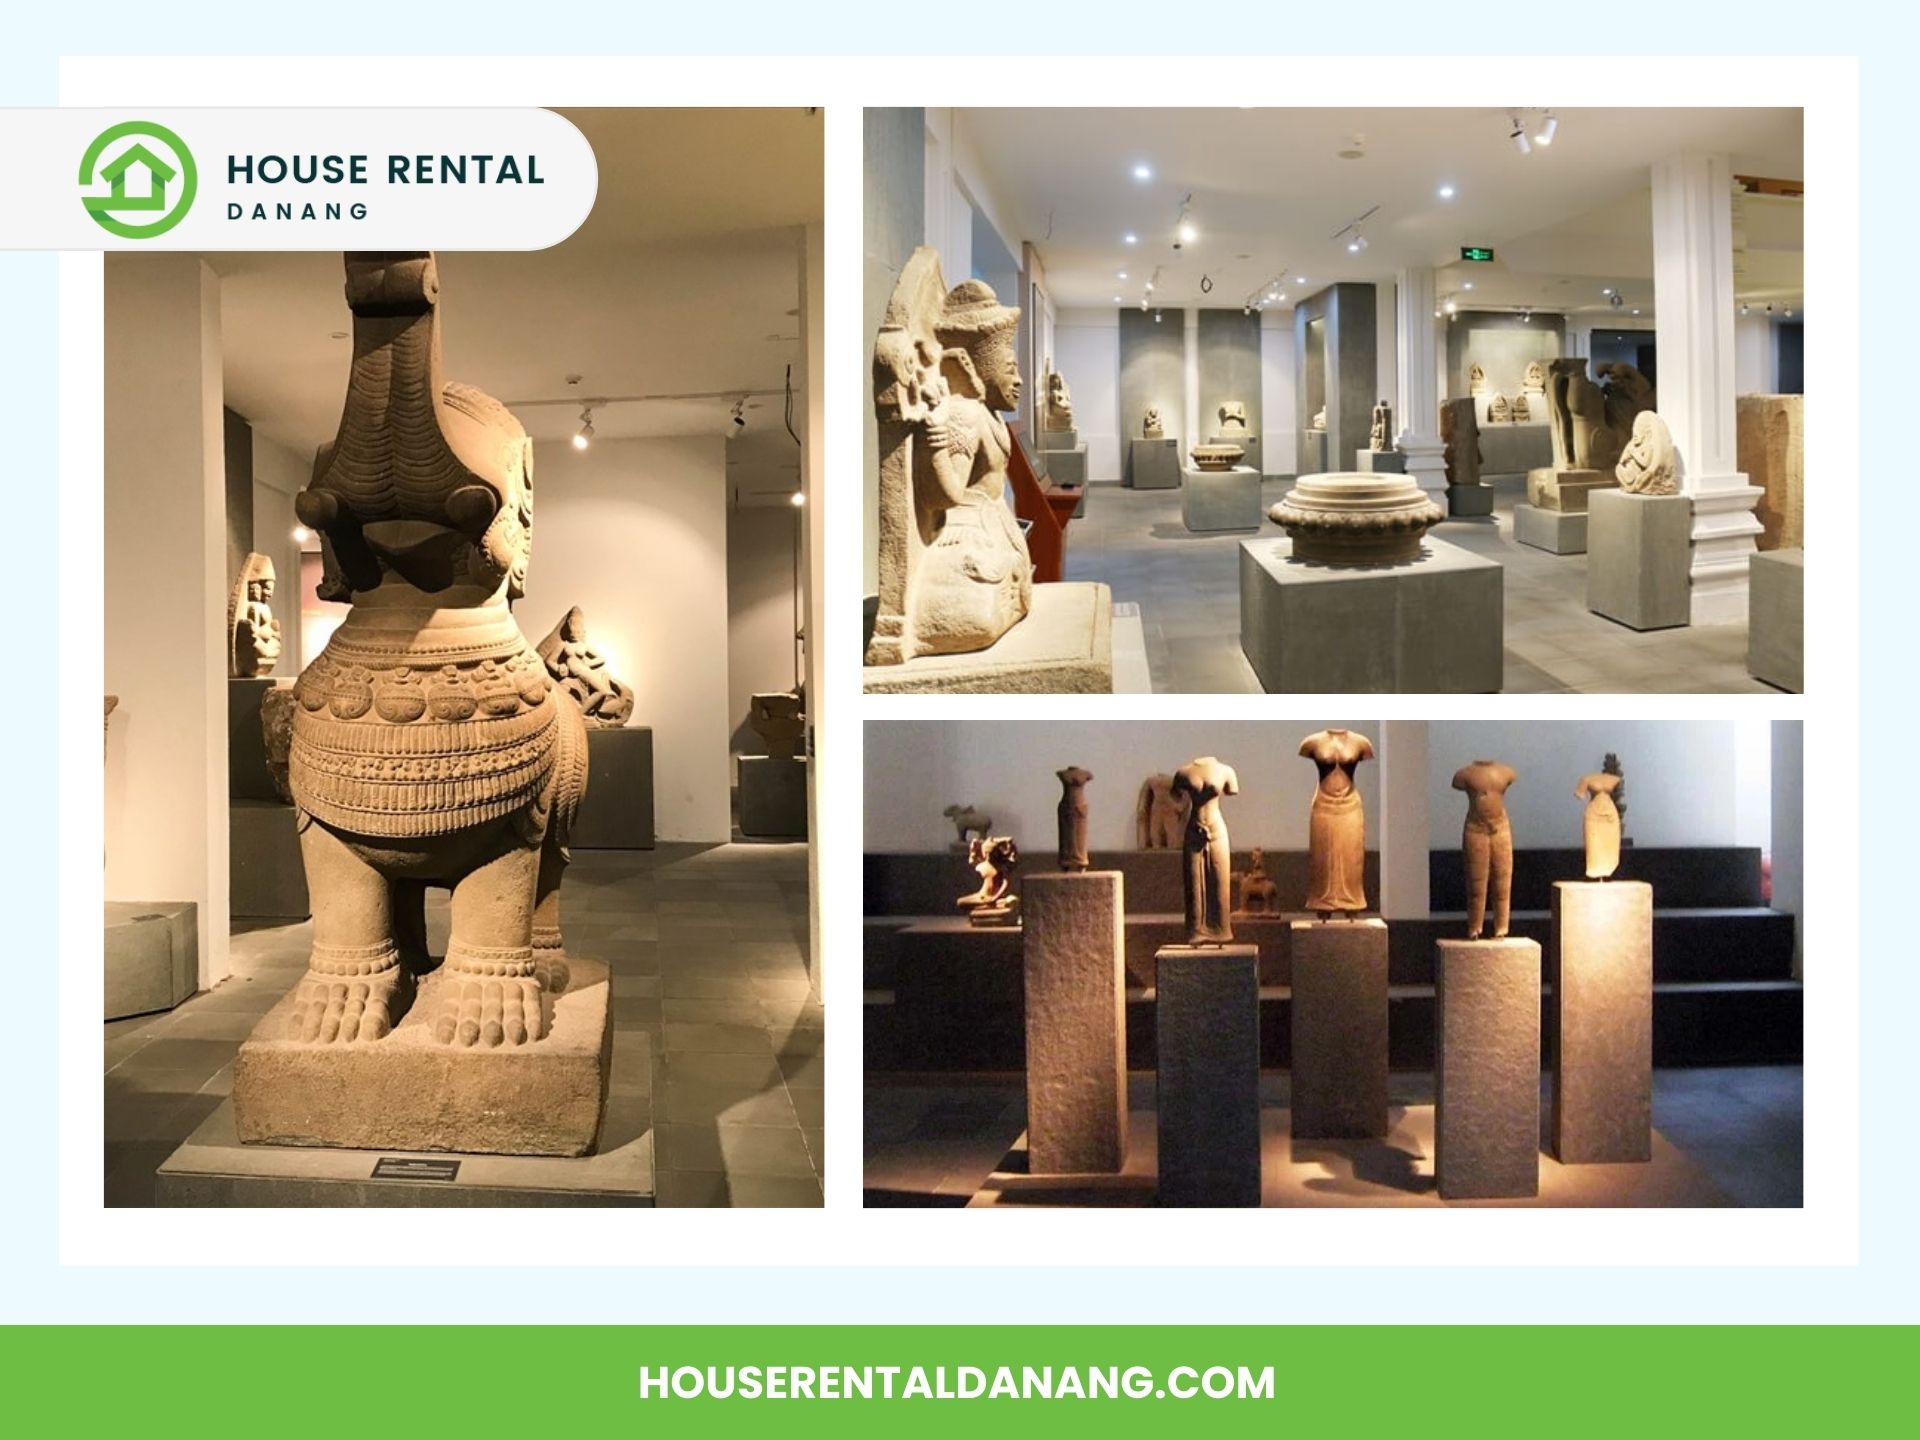 Various stone sculptures displayed in a museum exhibit, showcasing artifacts of different shapes and sizes. The display covers multiple rooms with ambient lighting. Banner reads "HOUSE RENTAL DANANG" at the Museum of Cham Sculpture in Da Nang.